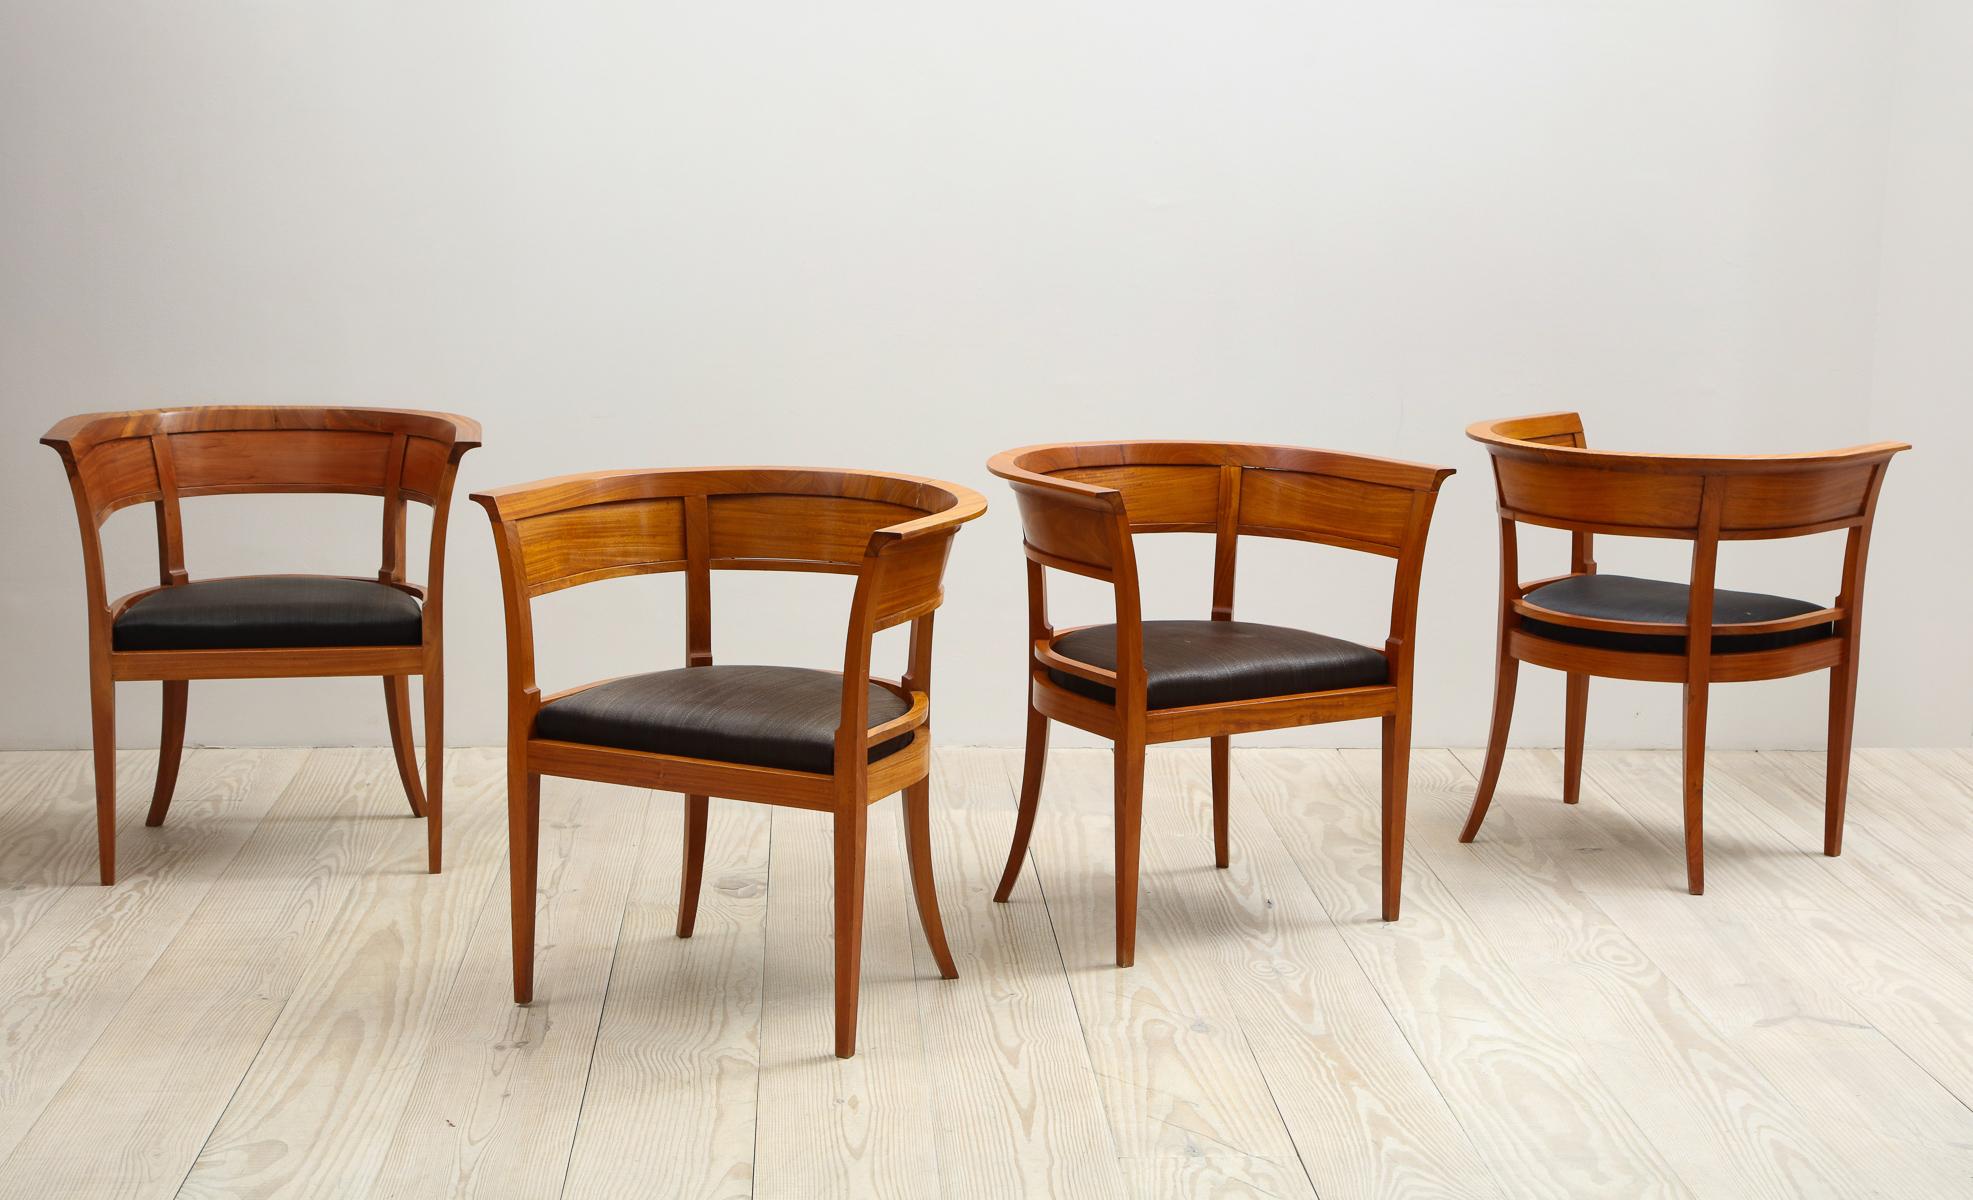 Kaare Klint, Rare Armchairs with Back Wood Panels, 1916 5